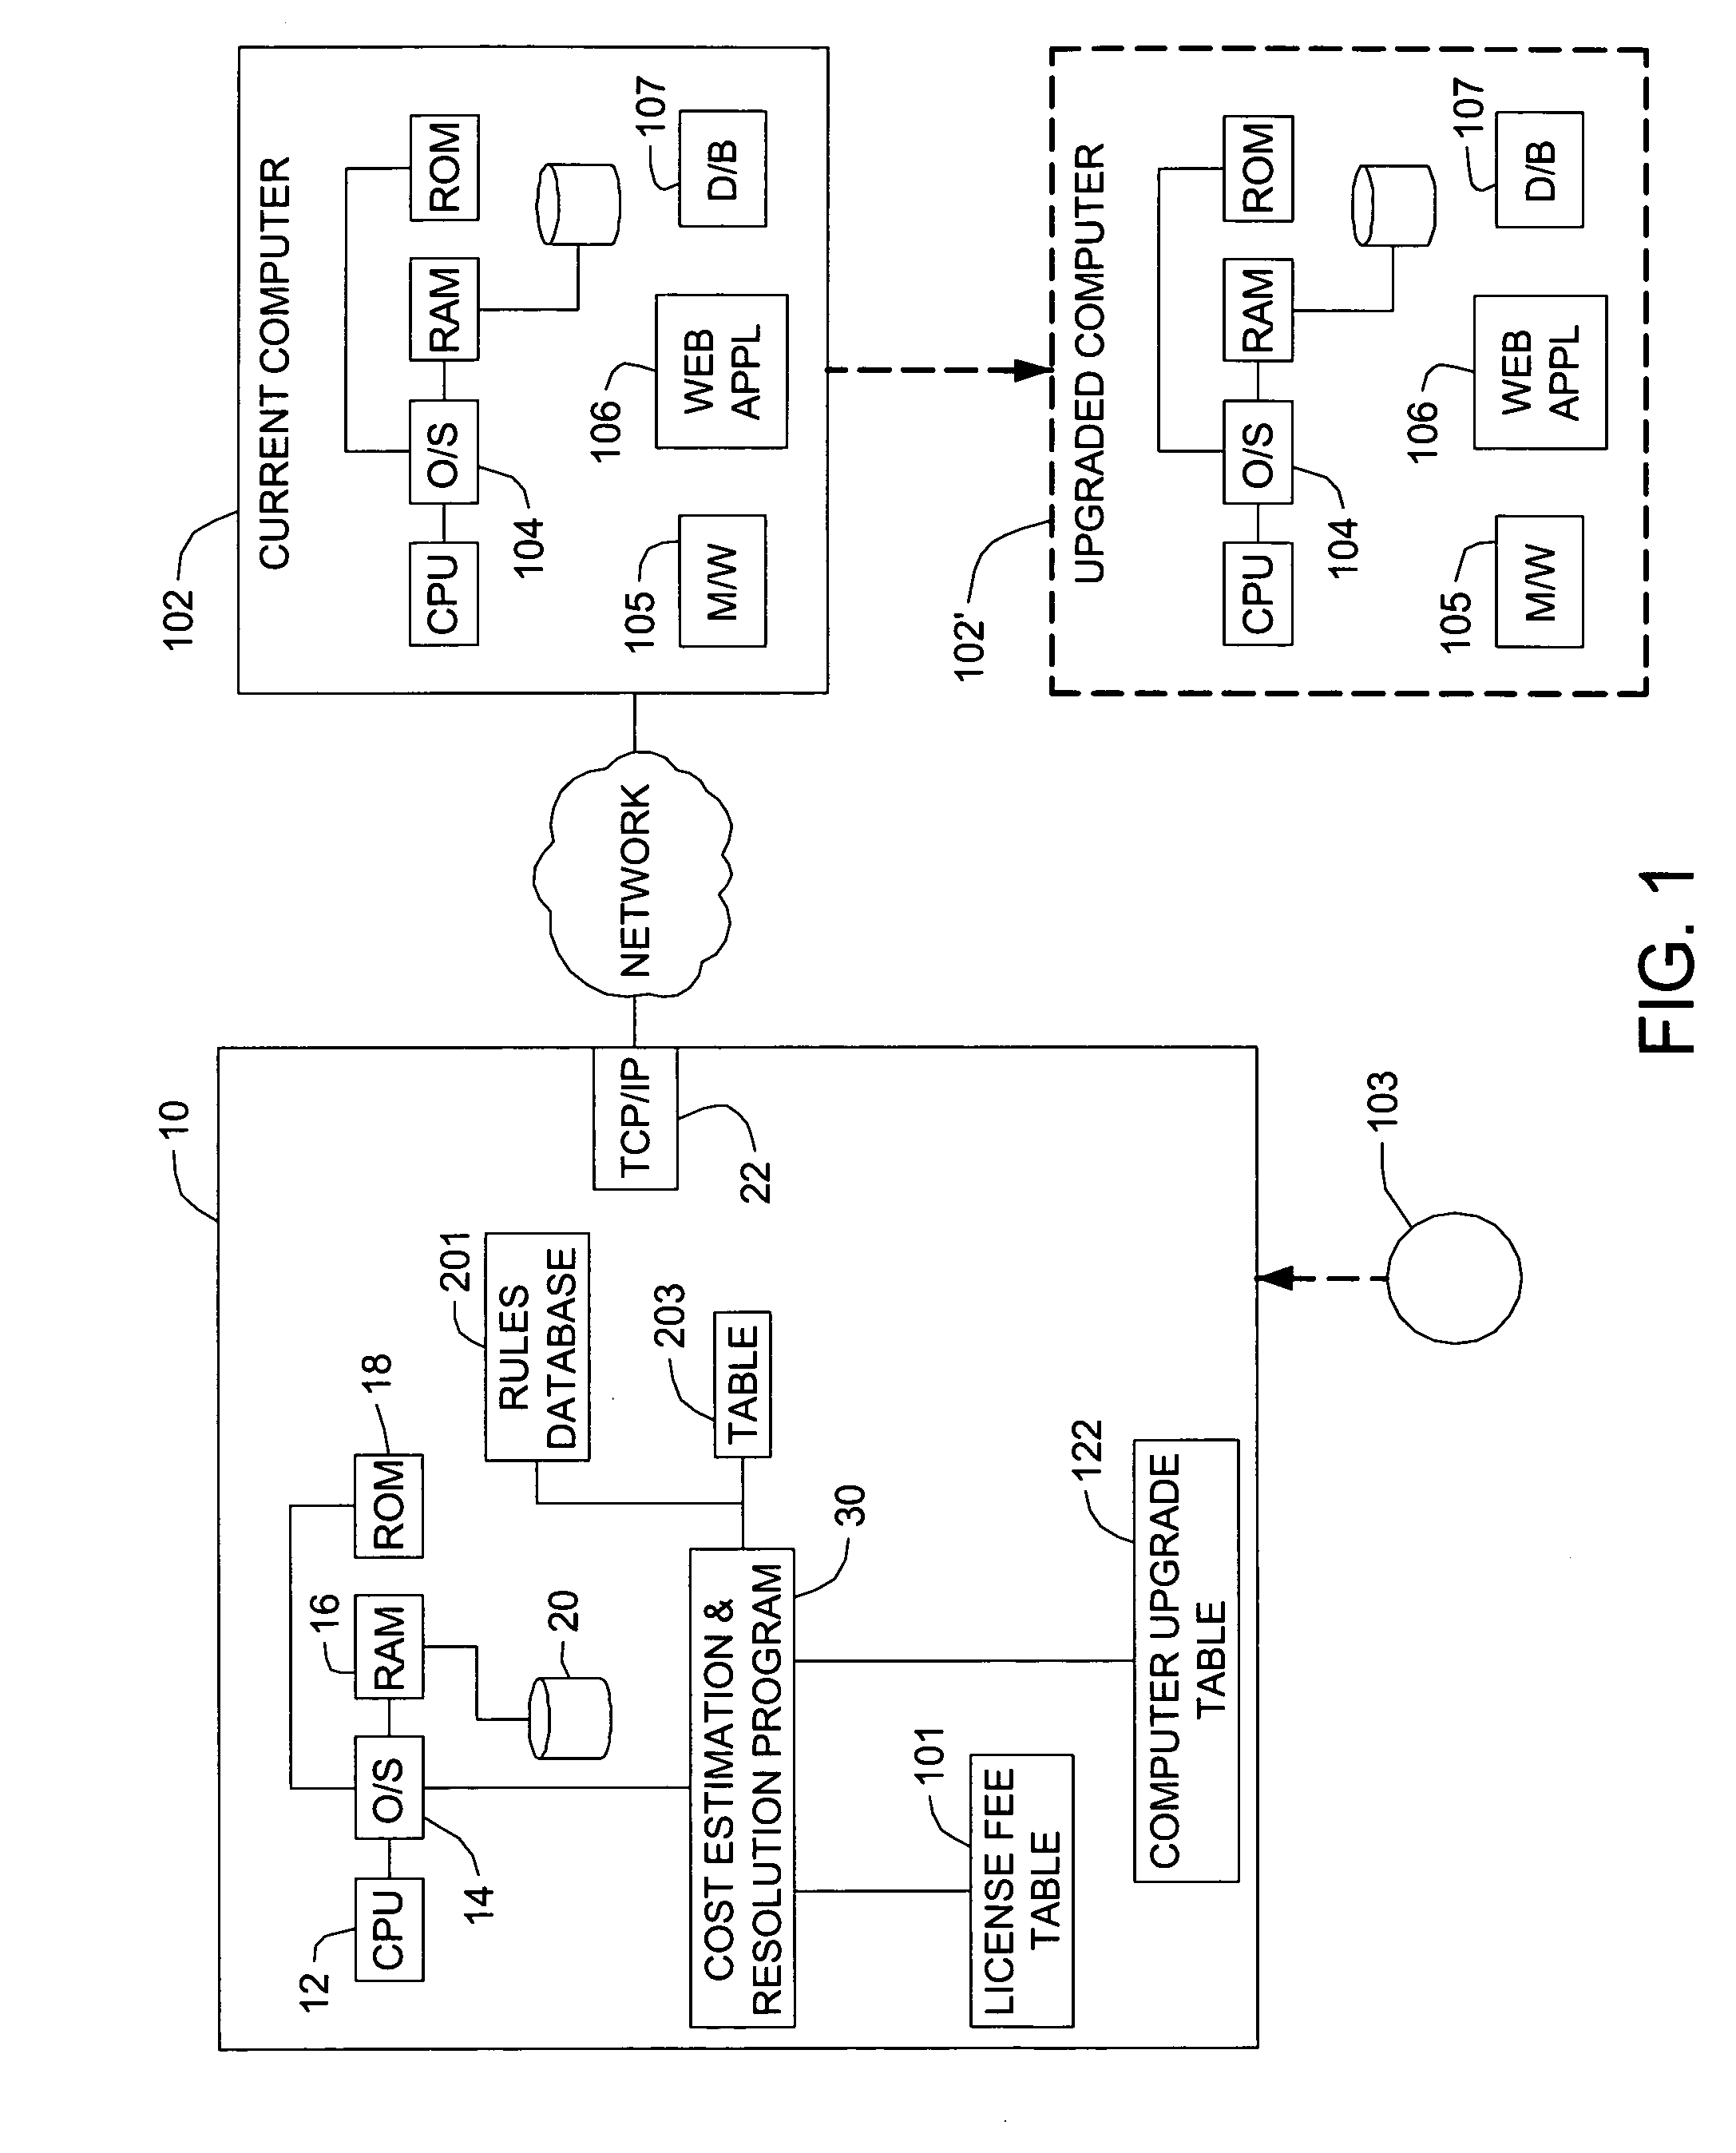 System, method and program to manage software licenses